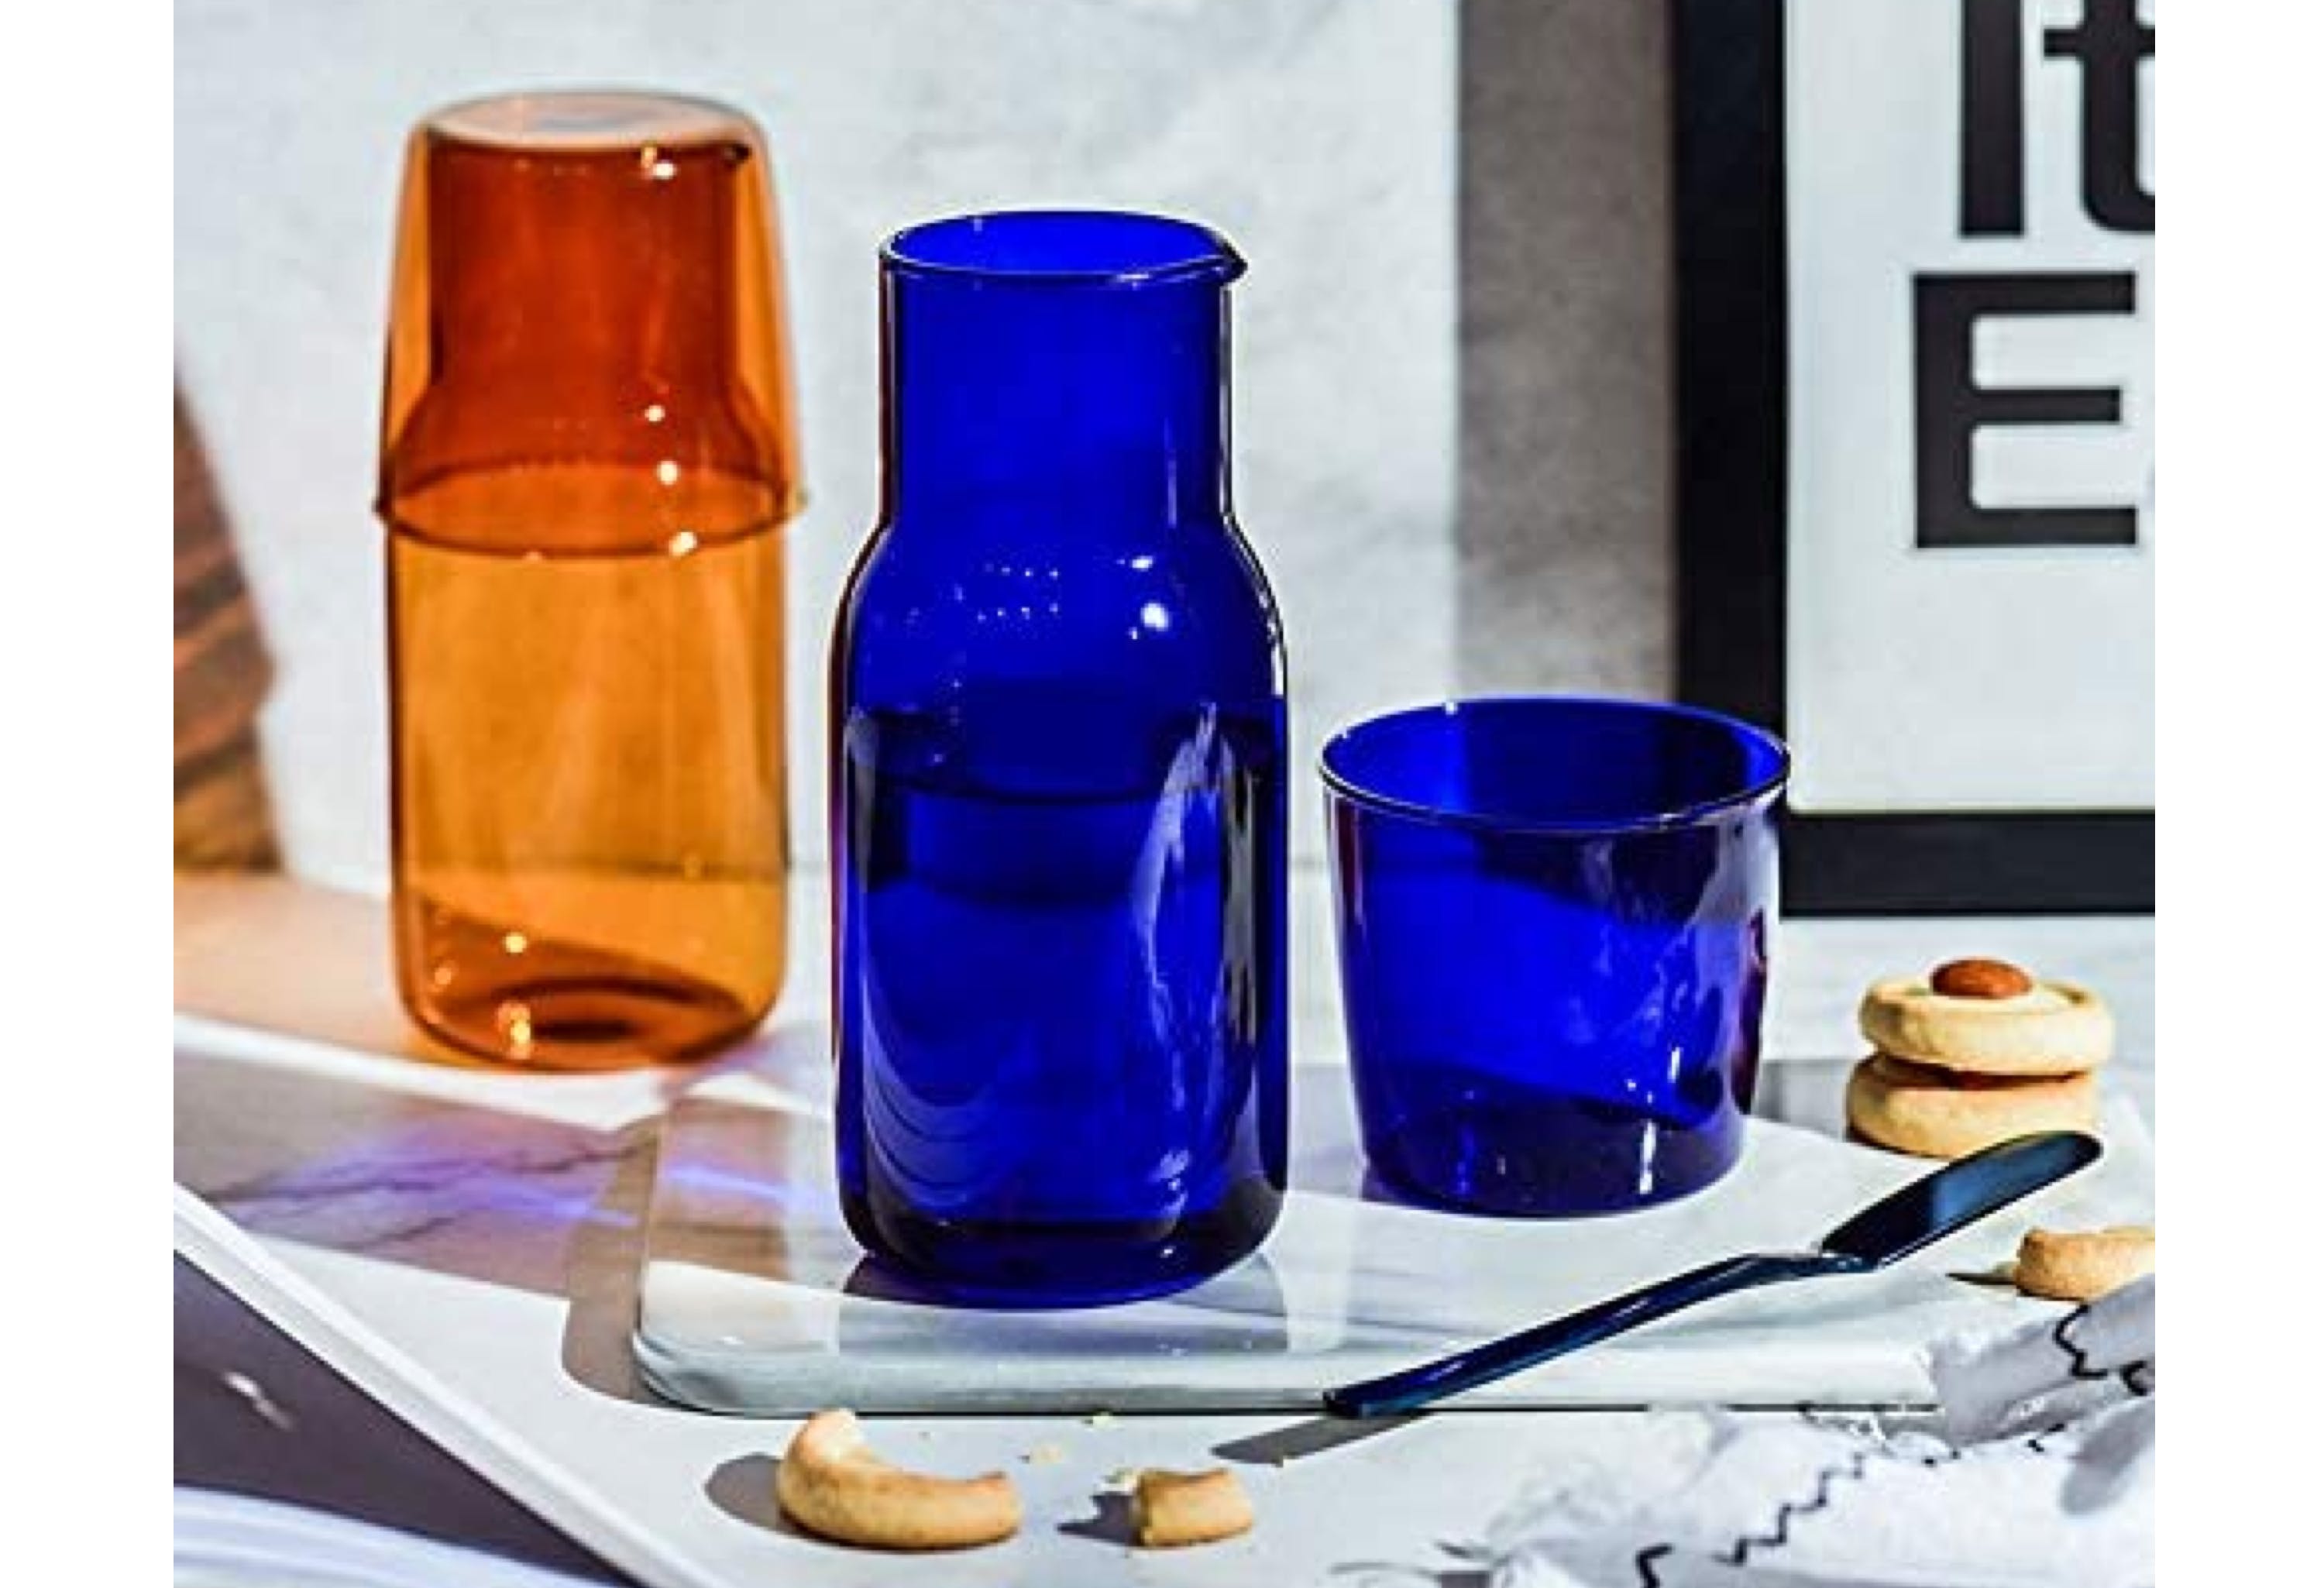 http://res.cloudinary.com/the-infatuation/image/upload/v1656122508/cms/features/the-best-bedside-carafes/Glass_Carafe.jpg